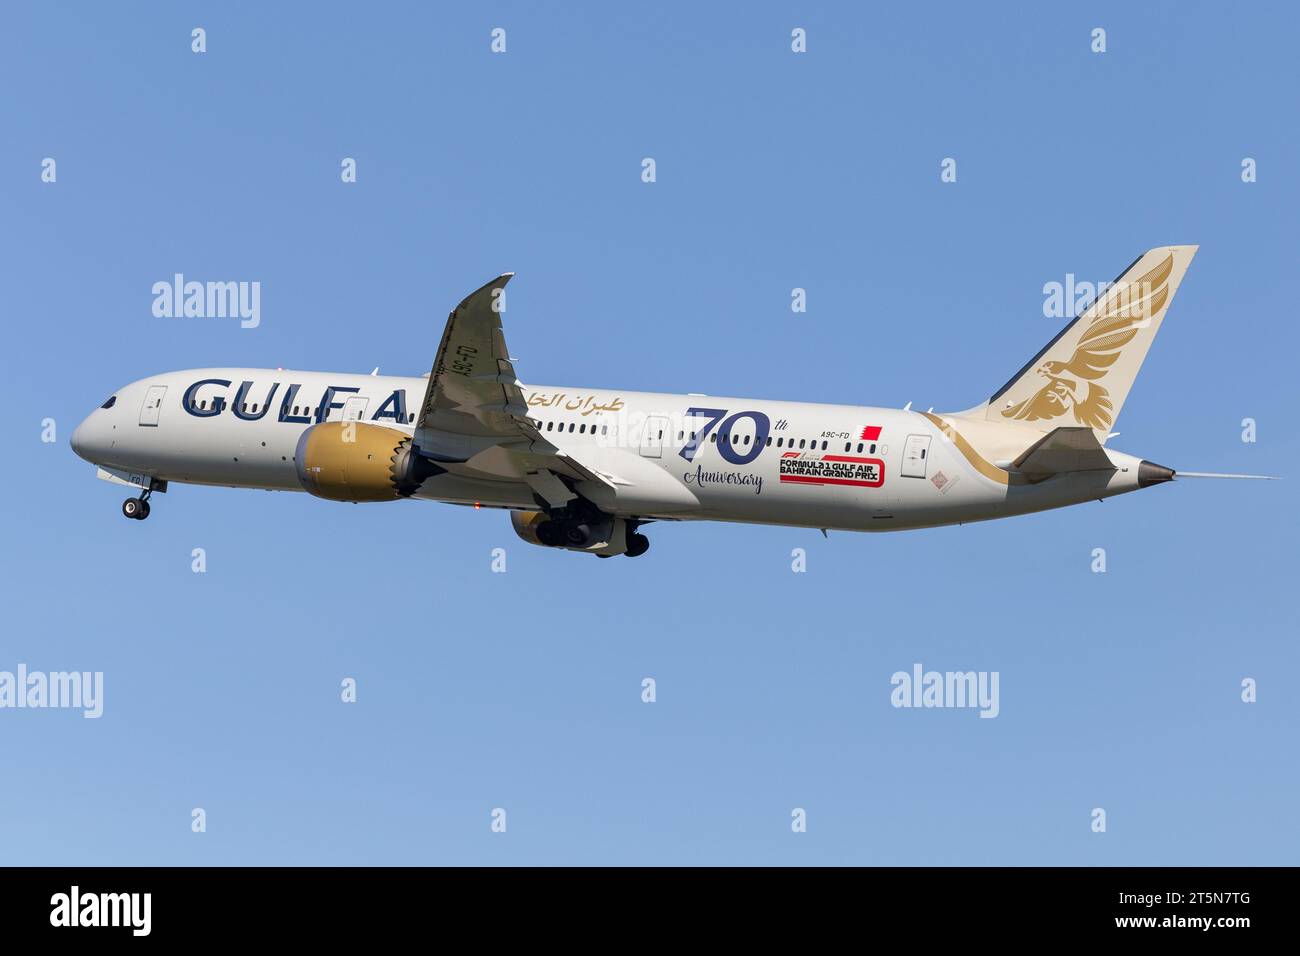 Gulf Air Boeing 787-9 Dreamliner, registration A9C-FD taking off from London Heathrow airport LHR in perfect conditions on a sunny blue sky afternoon Stock Photo